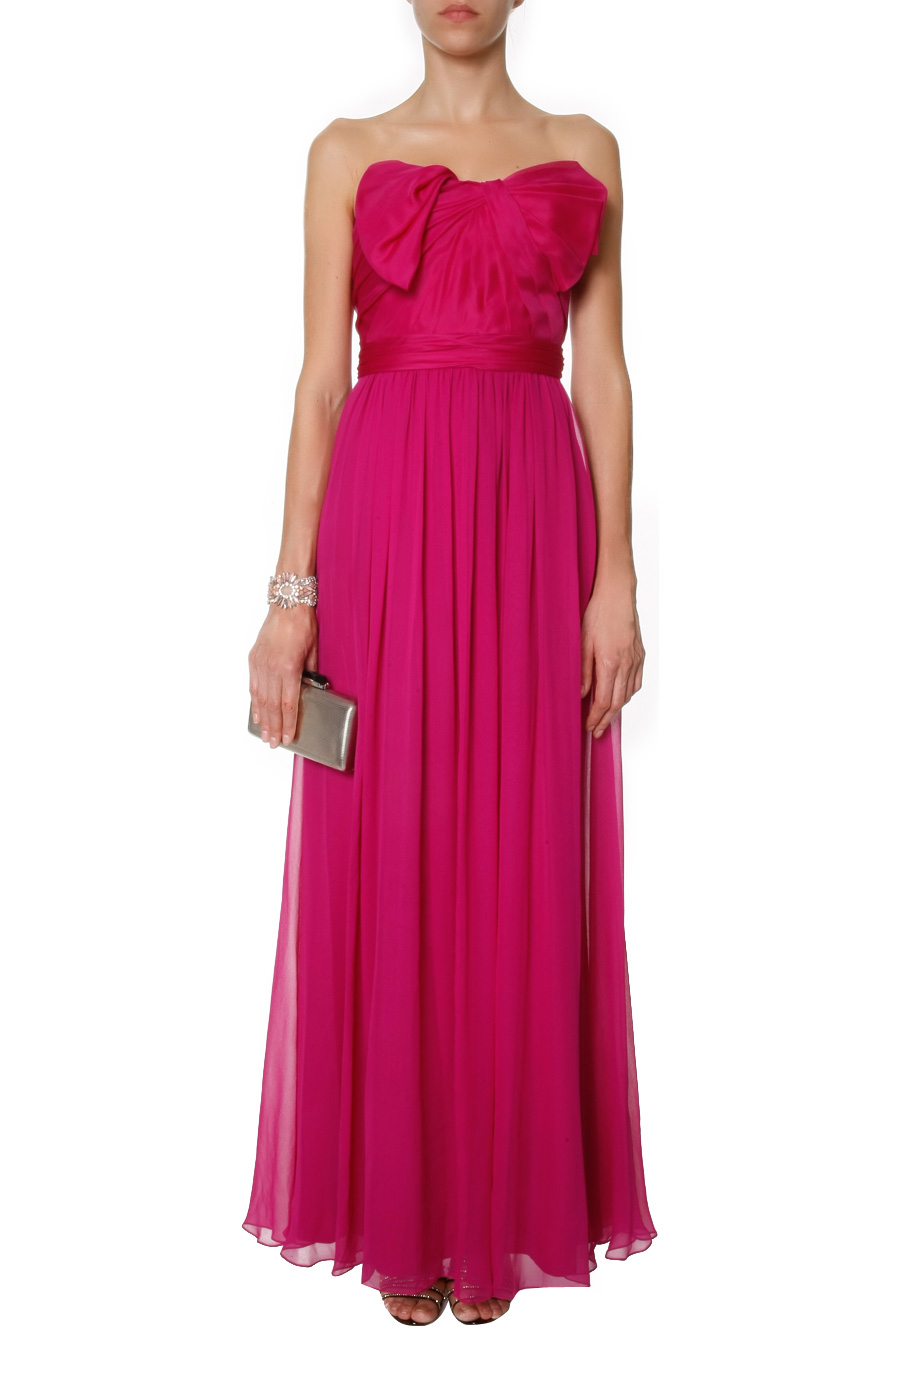 Notte by marchesa Strapless Chiffon Gown W Bow in Pink | Lyst